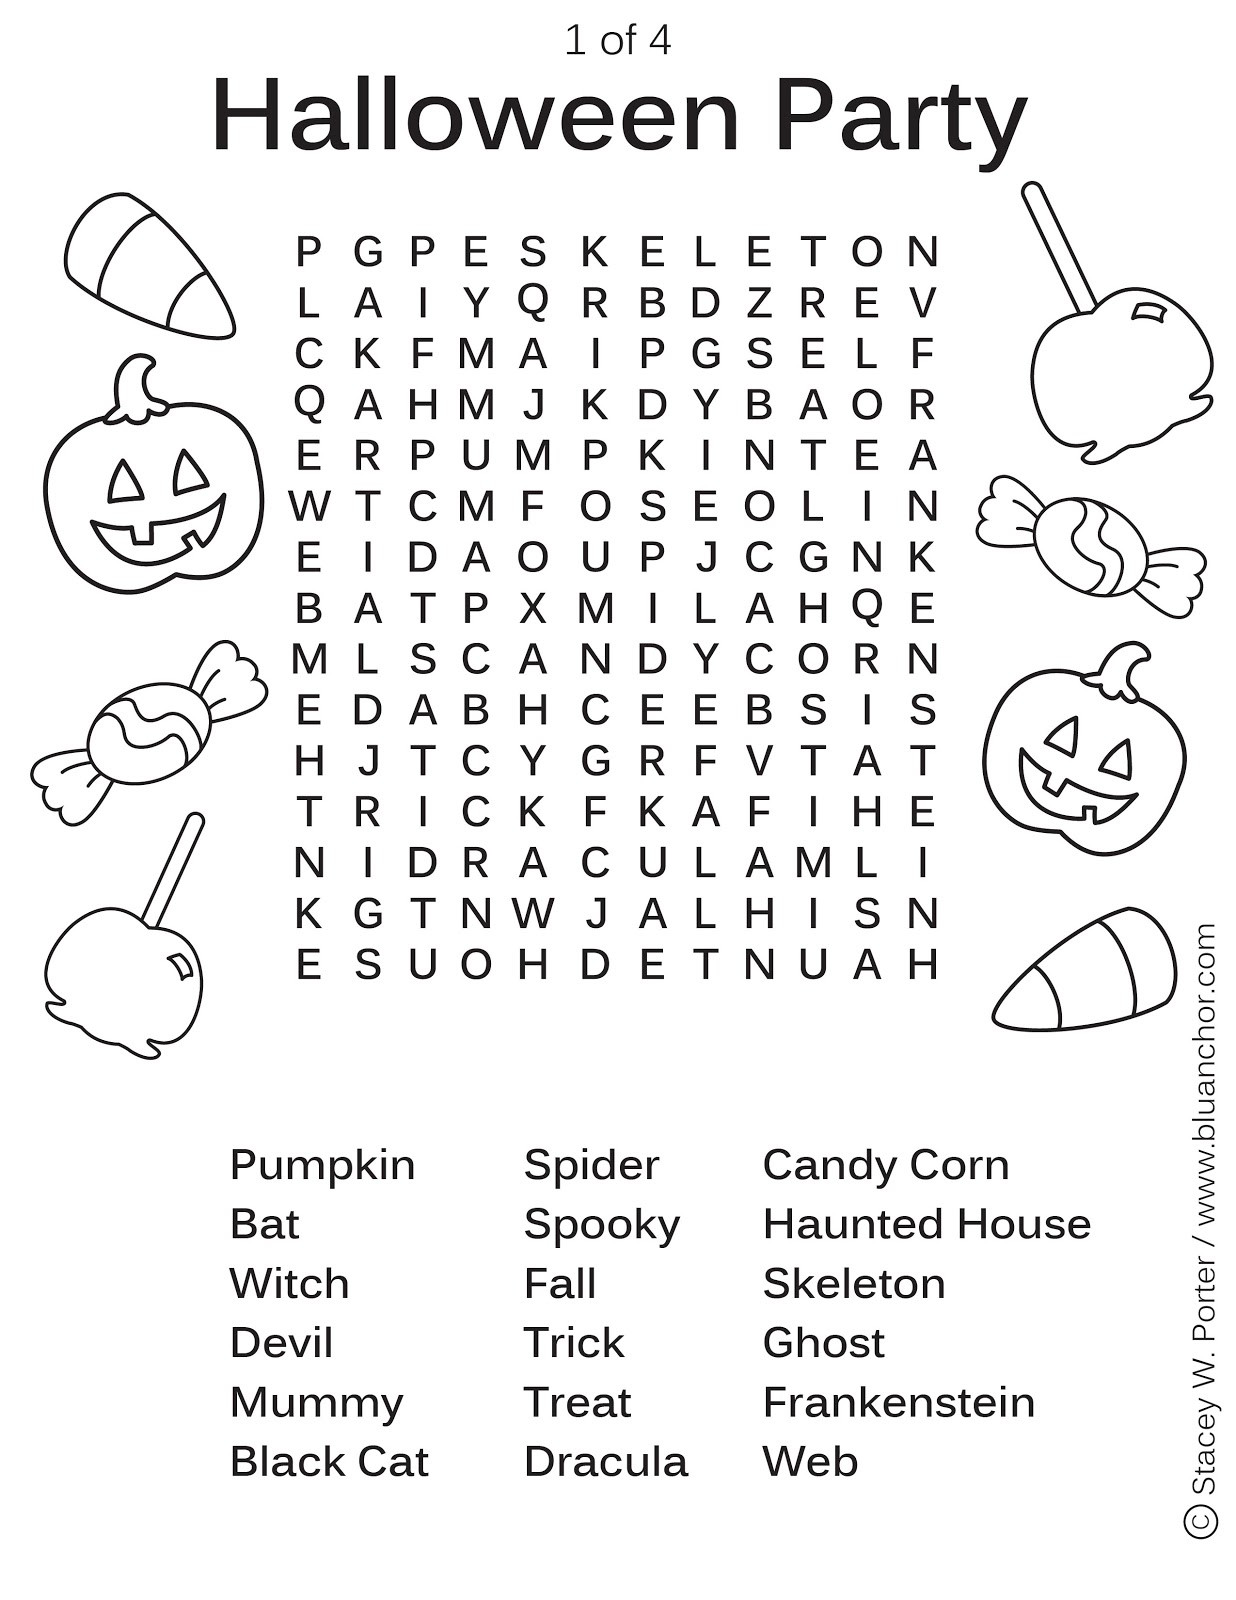 Halloween Activities Pages
 Blu Anchor Halloween Party Word Find Activity Sheet 1 of 4